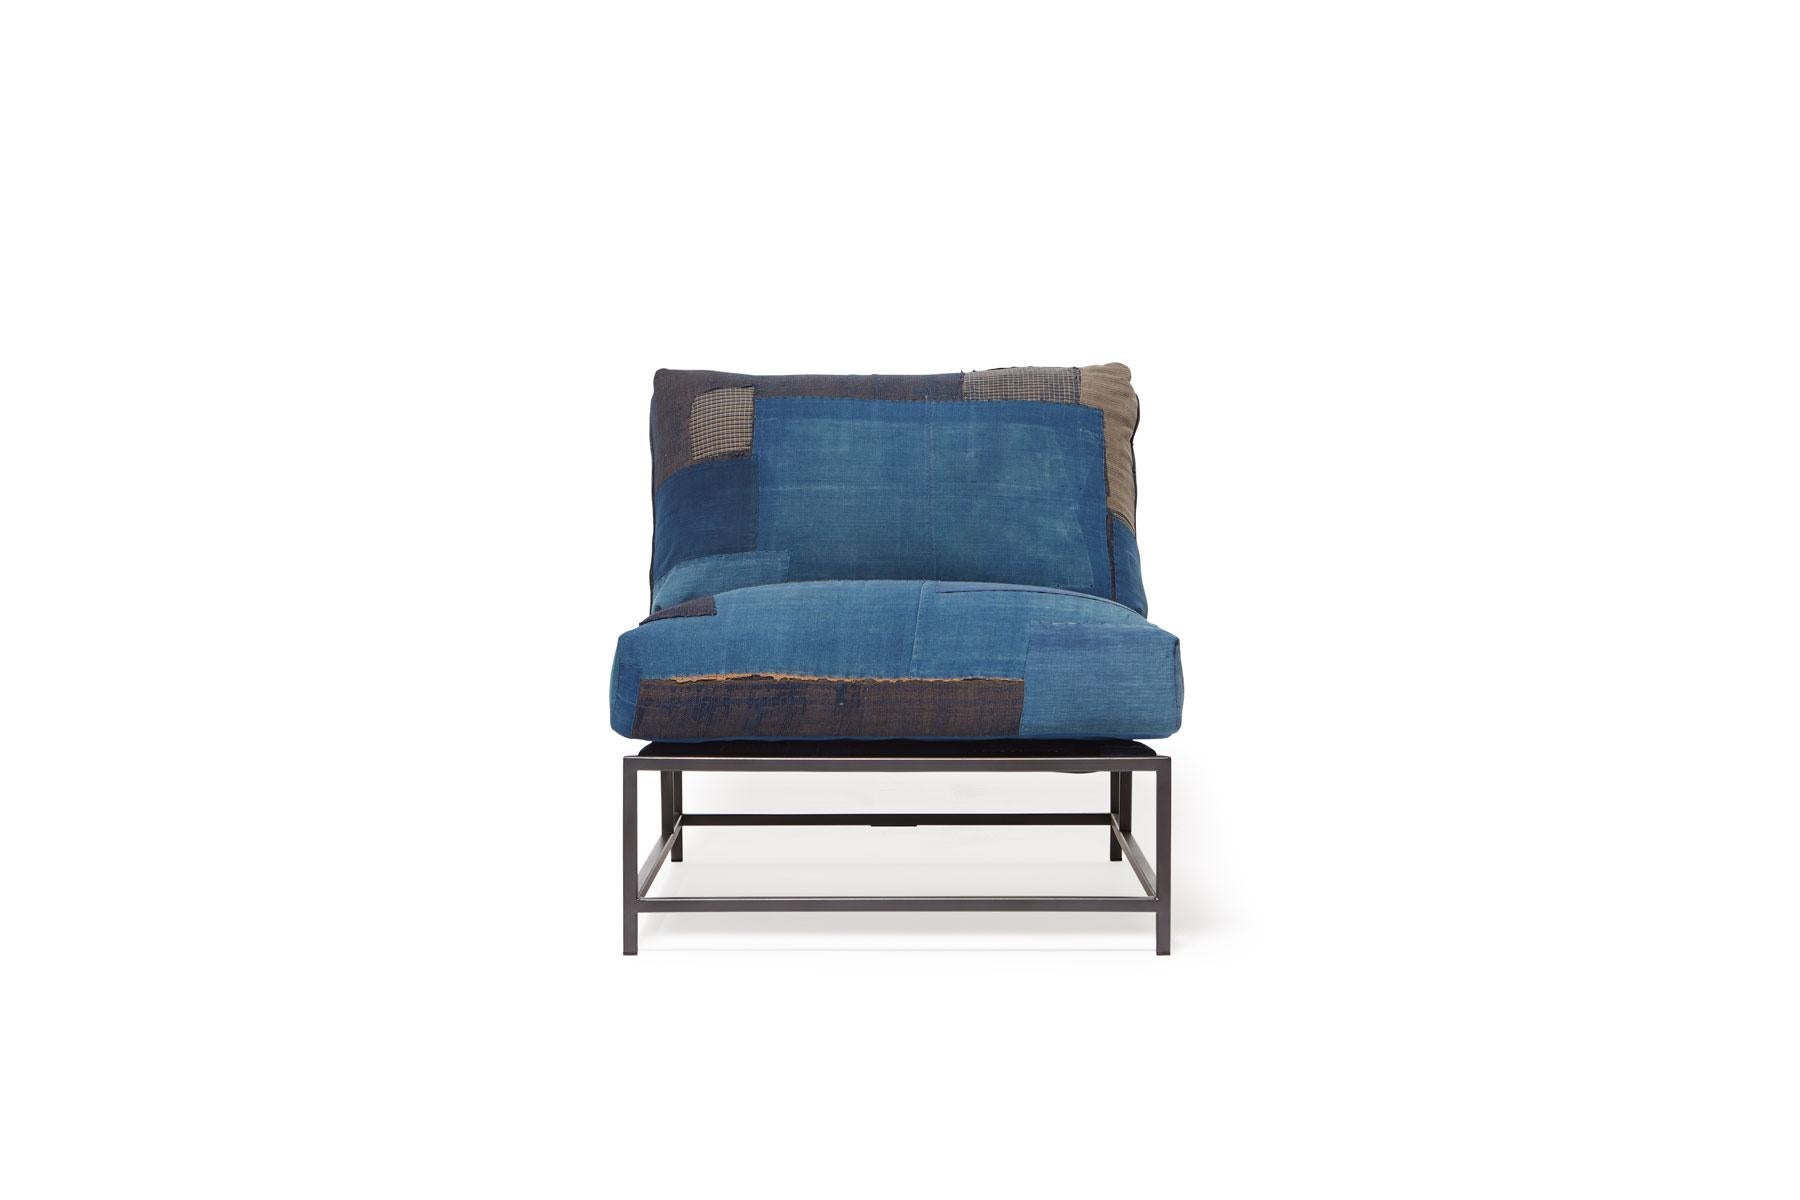 The Inheritance Chair by Stephen Kenn is as comfortable as it is unique. The design features an exposed construction composed of three elements - a steel frame, plush upholstery, and supportive belts. The deep seating area is perfect for a relaxing